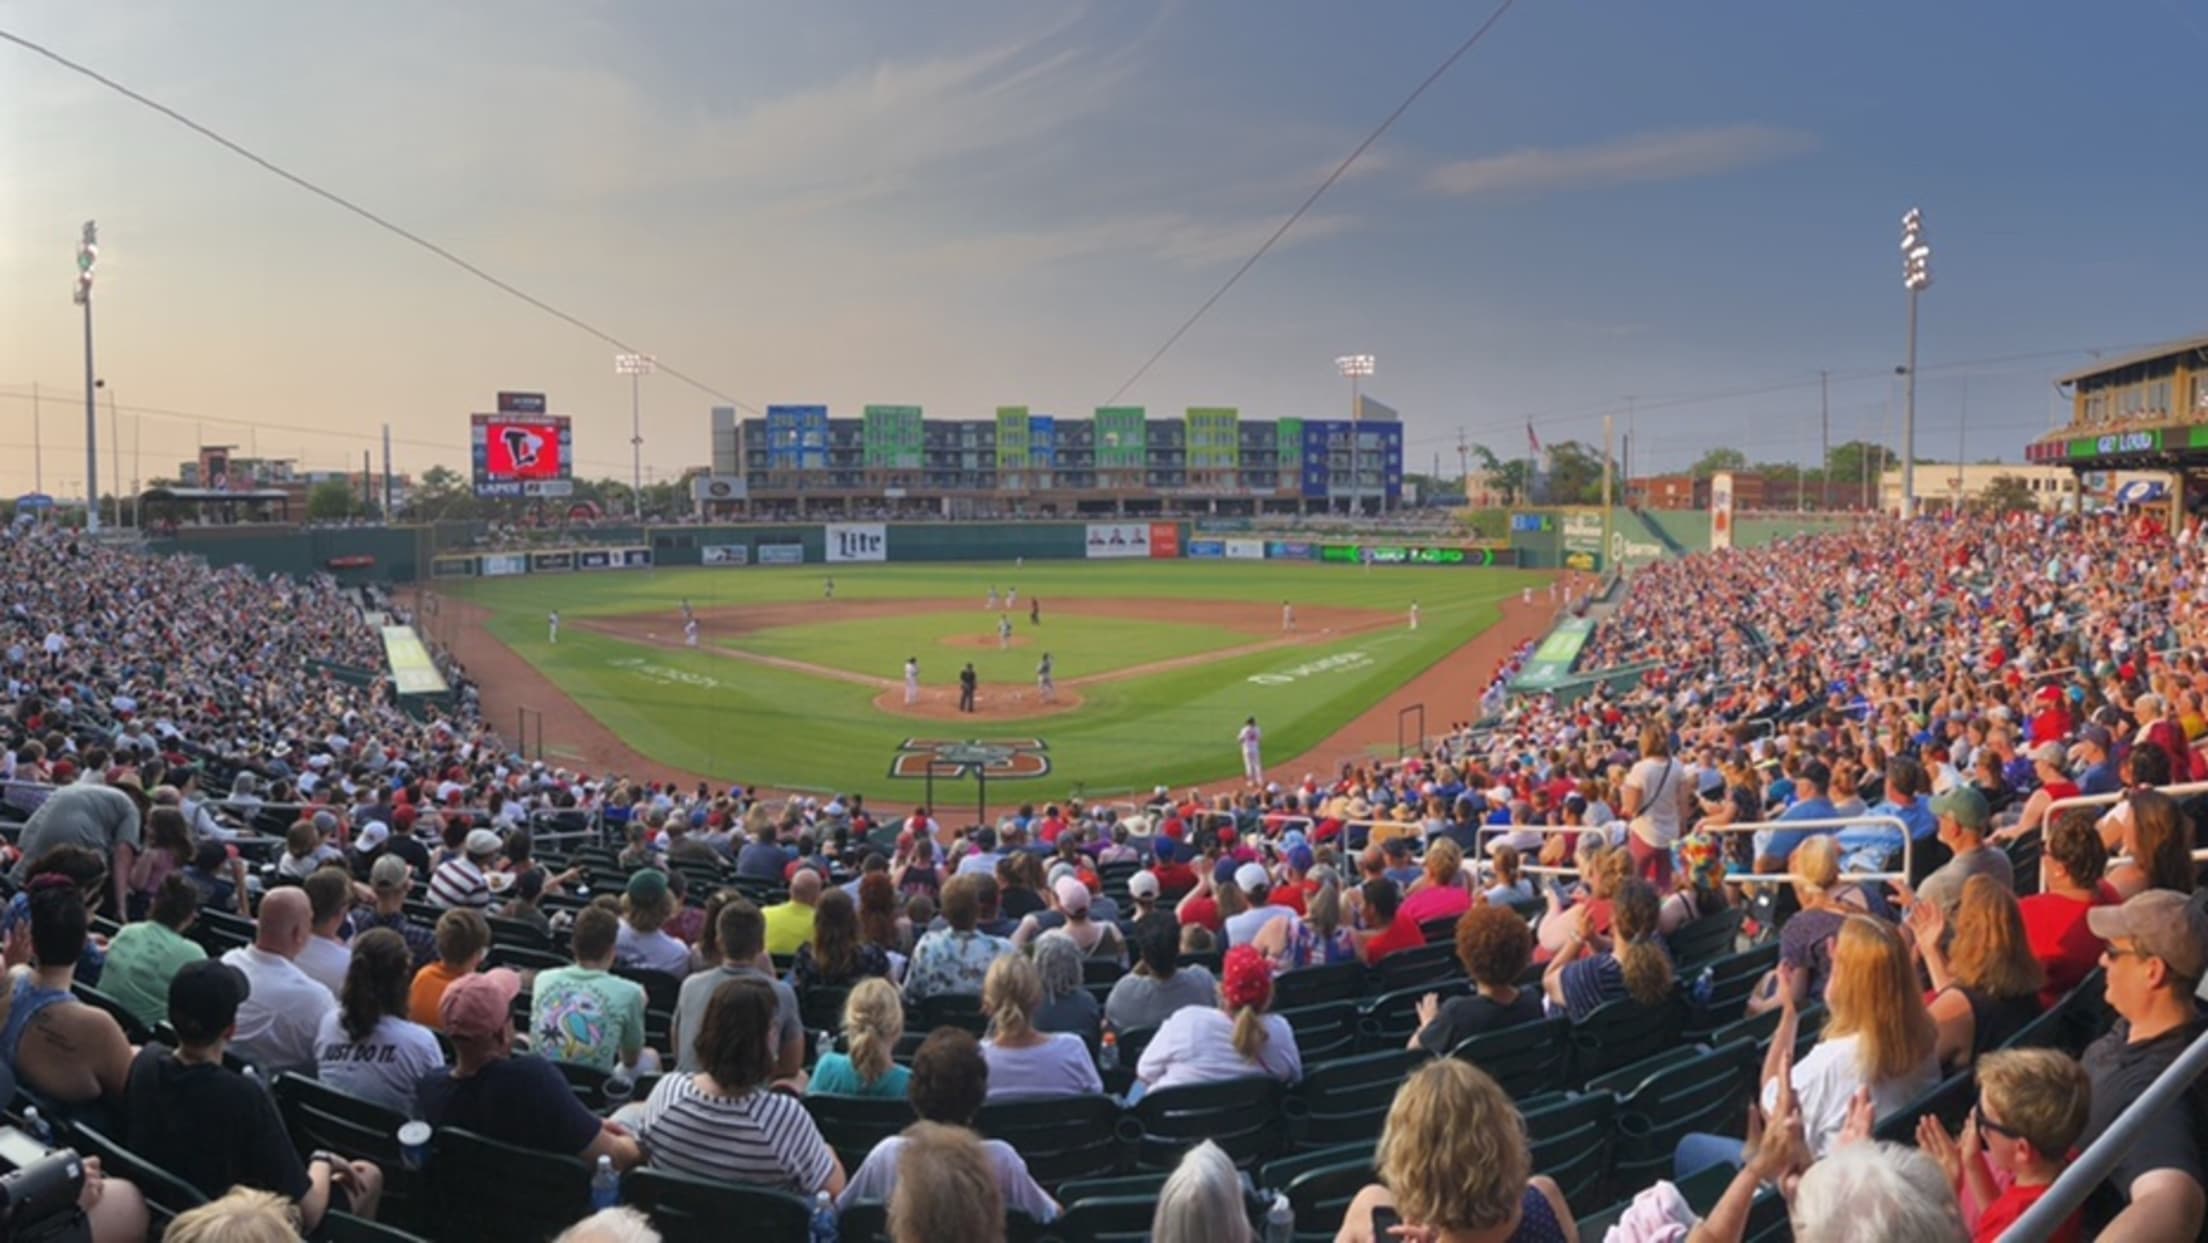 Lansing Lugnuts Schedule 2022 Explore Jackson Field, Home Of The Lansing Lugnuts | New York Mets